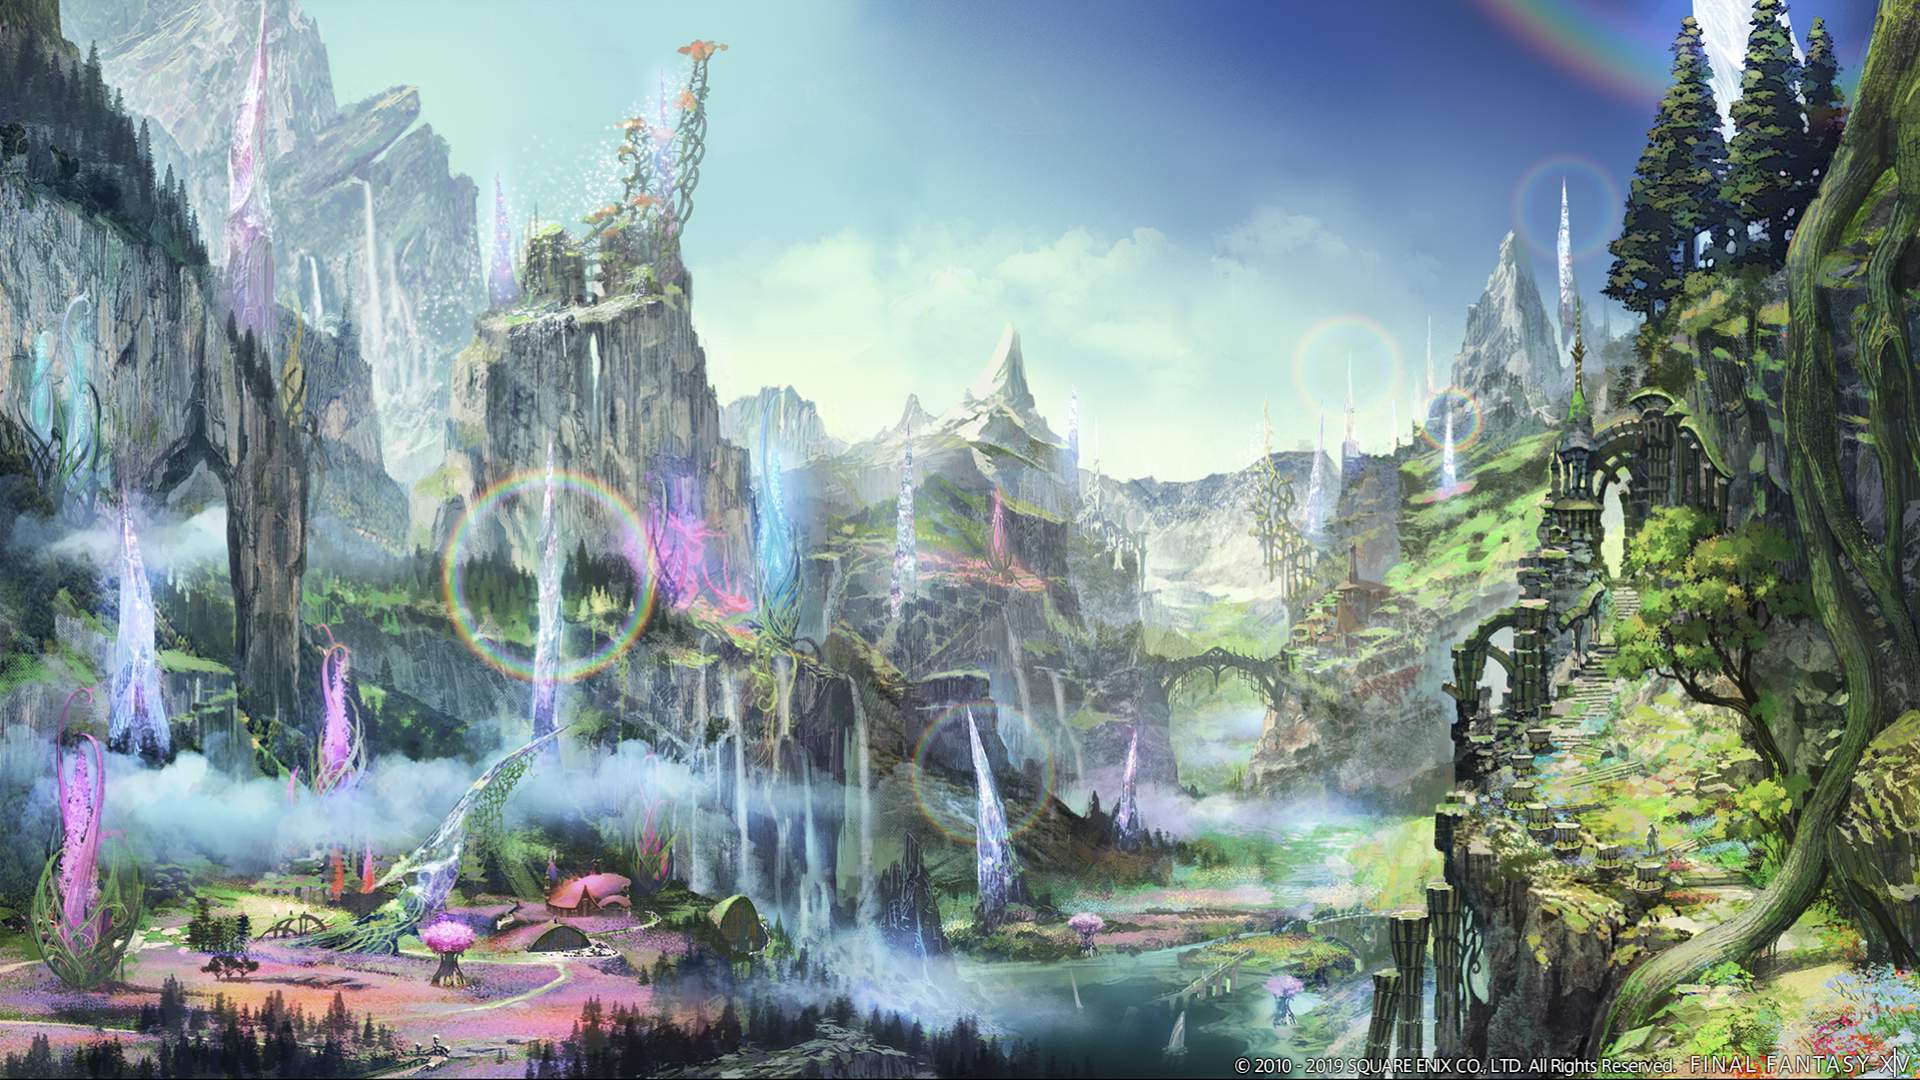 FINAL FANTASY XI ONLINE APRIL VERSION UPDATE ADDS TO THE VORACIOUS  RESURGENCE STORYLINE - Square Enix North America Press Hub